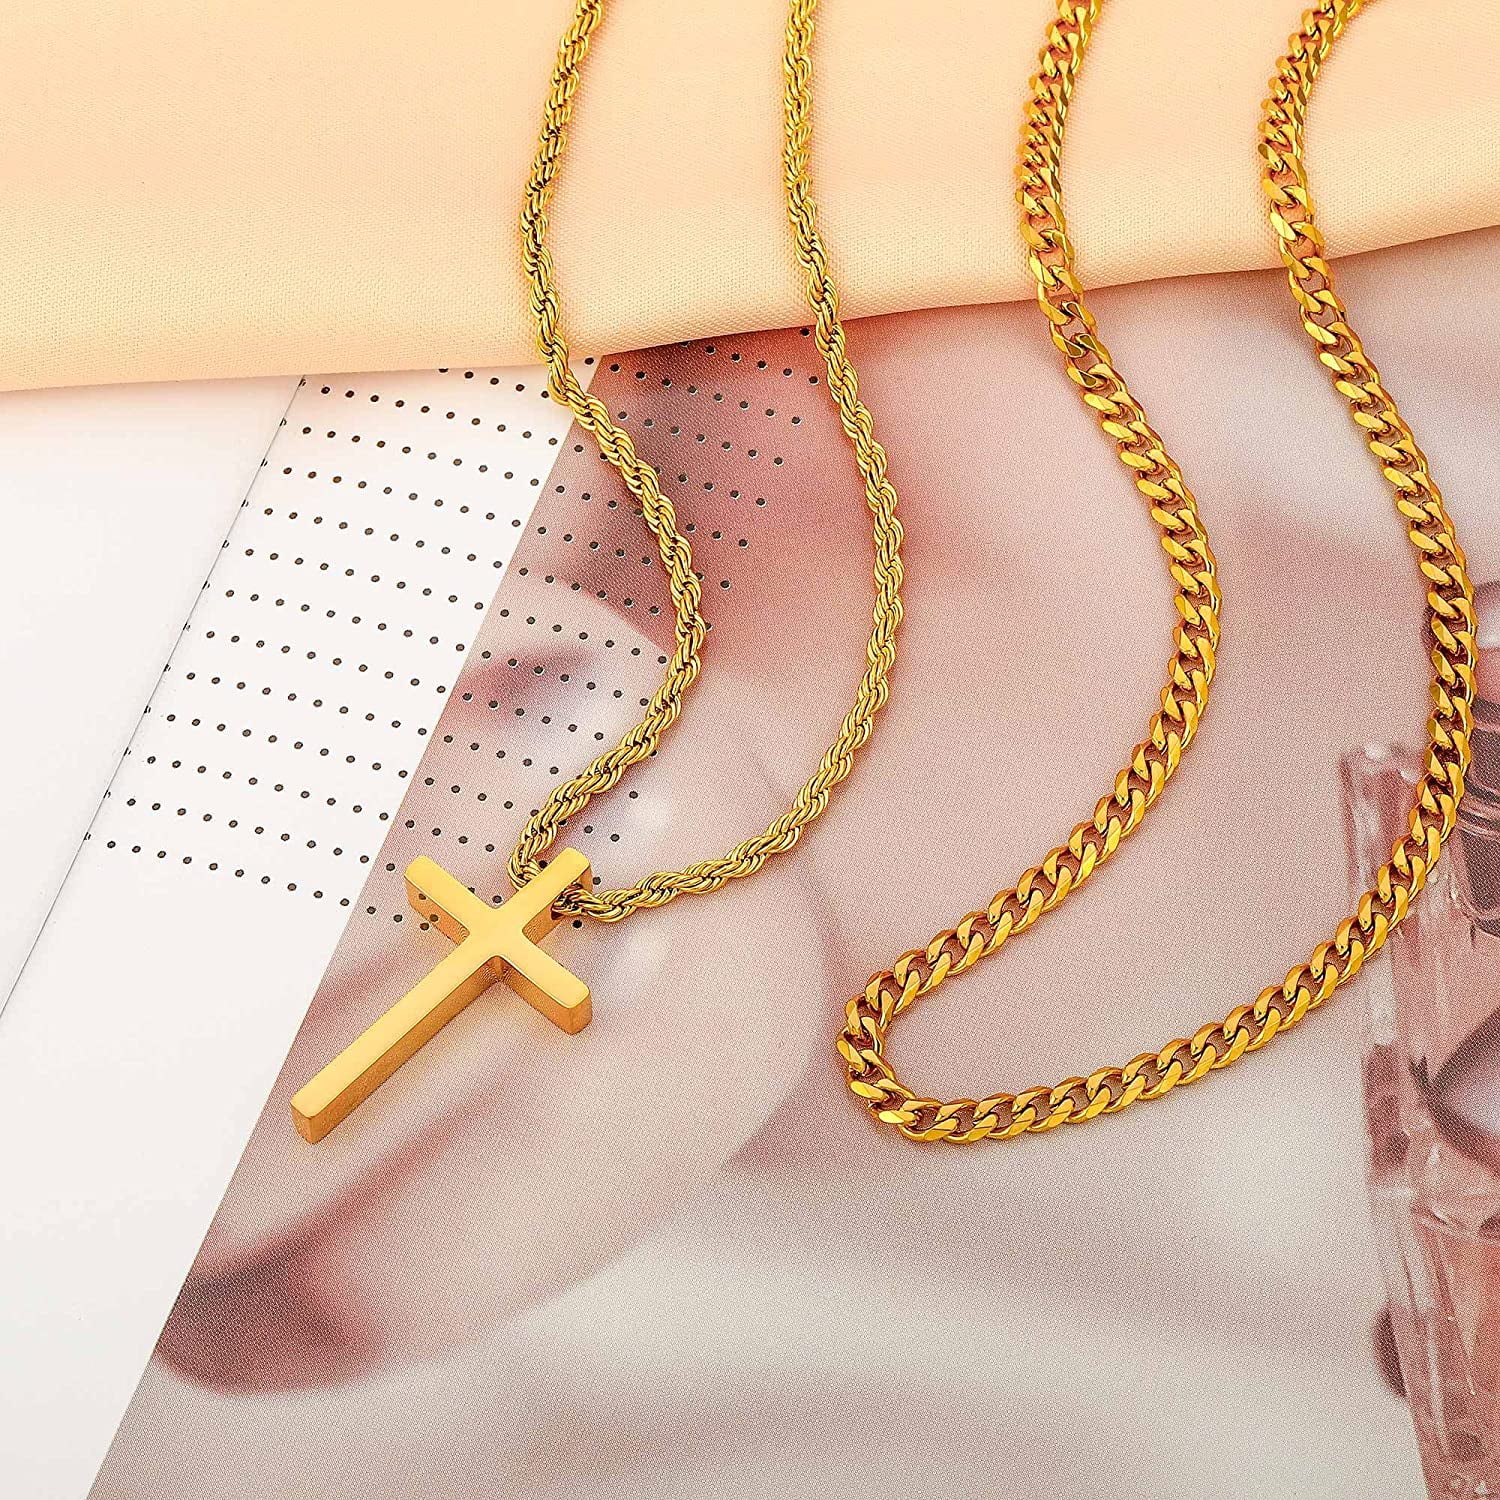 ADORATO JEWELRY 14K Gold Chain Style Cross Pendant Necklace Solid Clasp for  Men, Husband Thin for Charms Miami Cuban Link Diamond Cut Religious Beveled  Edge (20) | Amazon.com